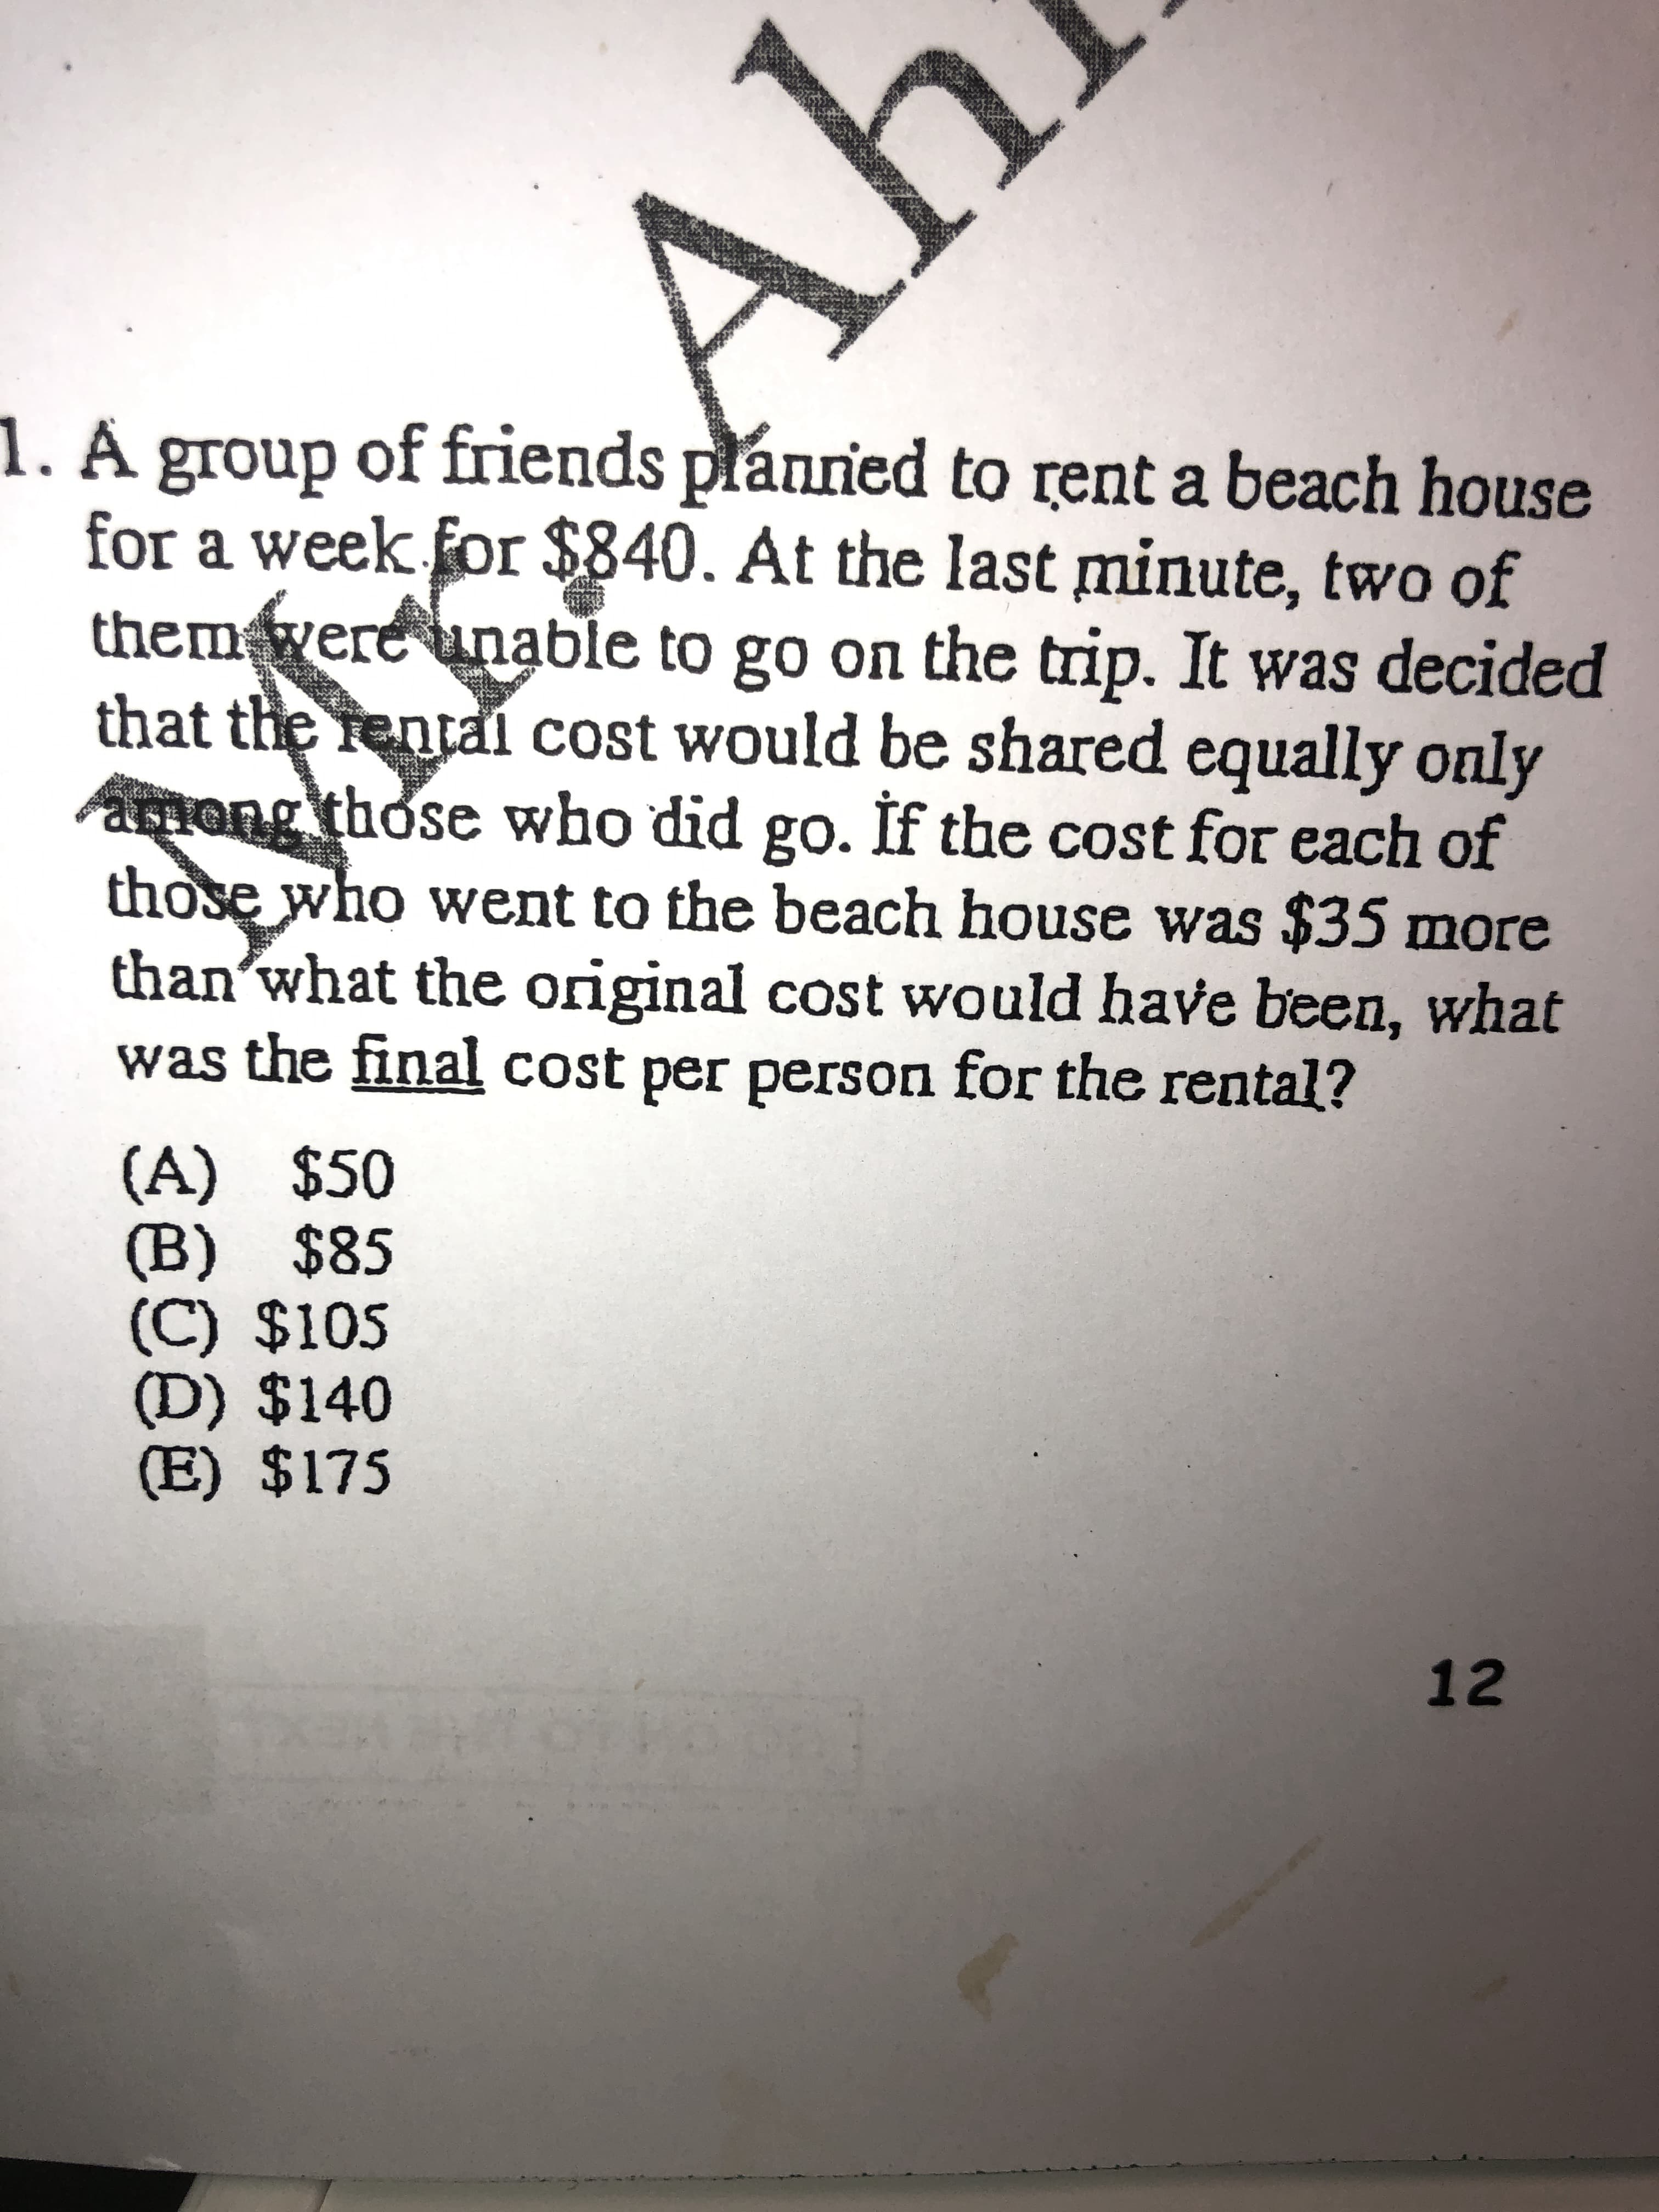 . A group of friends plannied to rent a beach house
for a week for $840. At the last minute, two of
them were unable to go on the trip. It was decided
that the fentai cost would be shared equally only
Aong those who did go. İf the cost for each of
those who went to the beach house was $35 more
than what the original cost would have been, what
